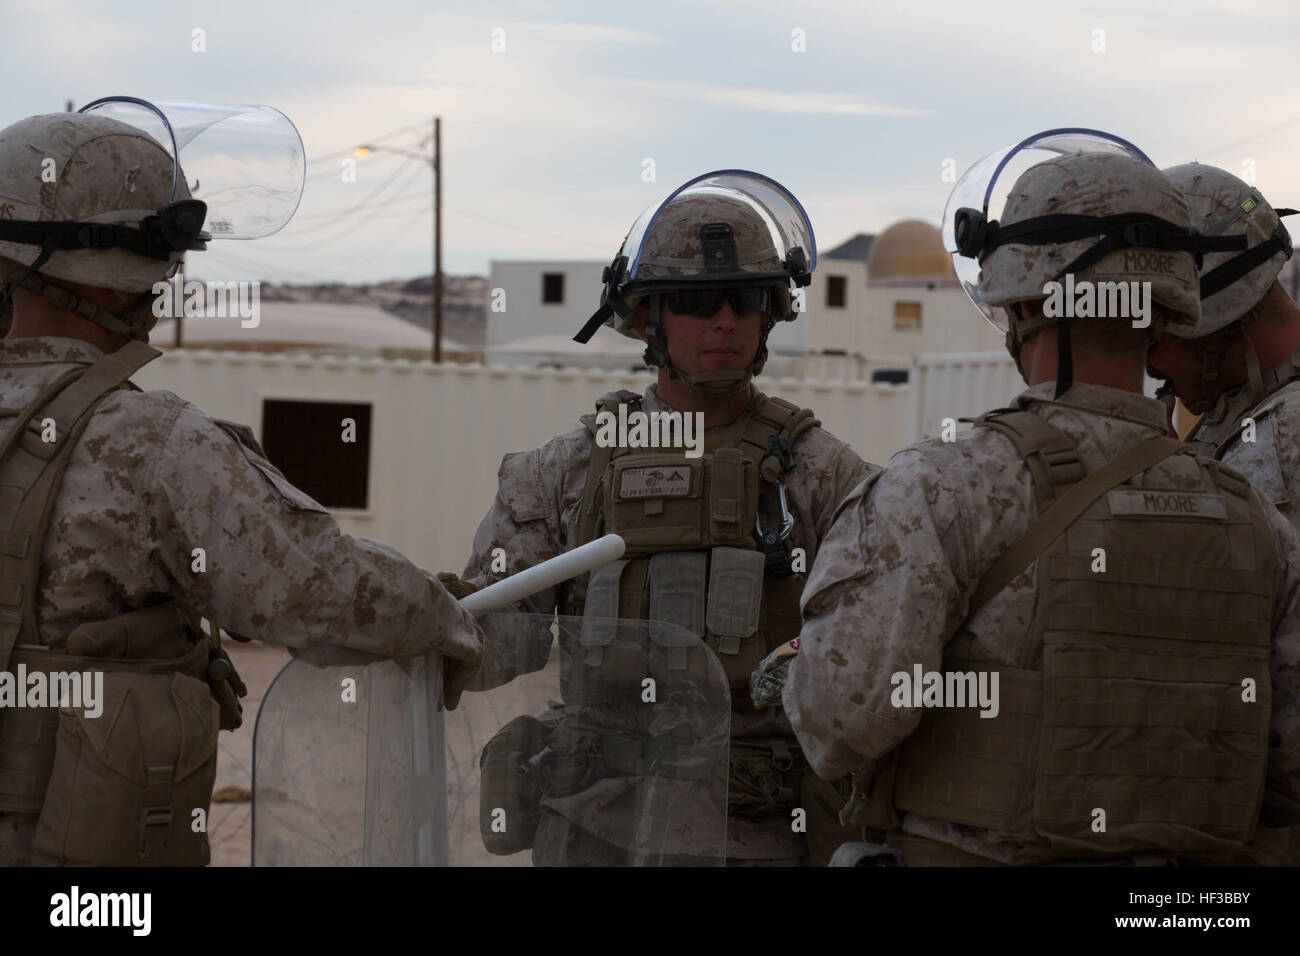 U.S. Marines with Kilo Company, 3rd Battalion, 8th Marines (3/8), conduct an embassy reinforcement during Integrated Training Exercise (ITX) 3-15 aboard Marine Corps Air Ground Combat Center Twentynine Palms, Calif., May 26, 2015. 6th Marines and subordinate units participated in ITX 3-15 to ensure all elements of Special-Purpose Marine Air Ground Task Force 6 (SPMAGTF-6) are prepared for upcoming deployments and operational commitments. (U.S. Marine Corps photo by Staff Sgt. Keonaona C. Paulo 2D MARDIV Combat Camera/Released) ITX 3-15 150526-M-EF955-687 Stock Photo